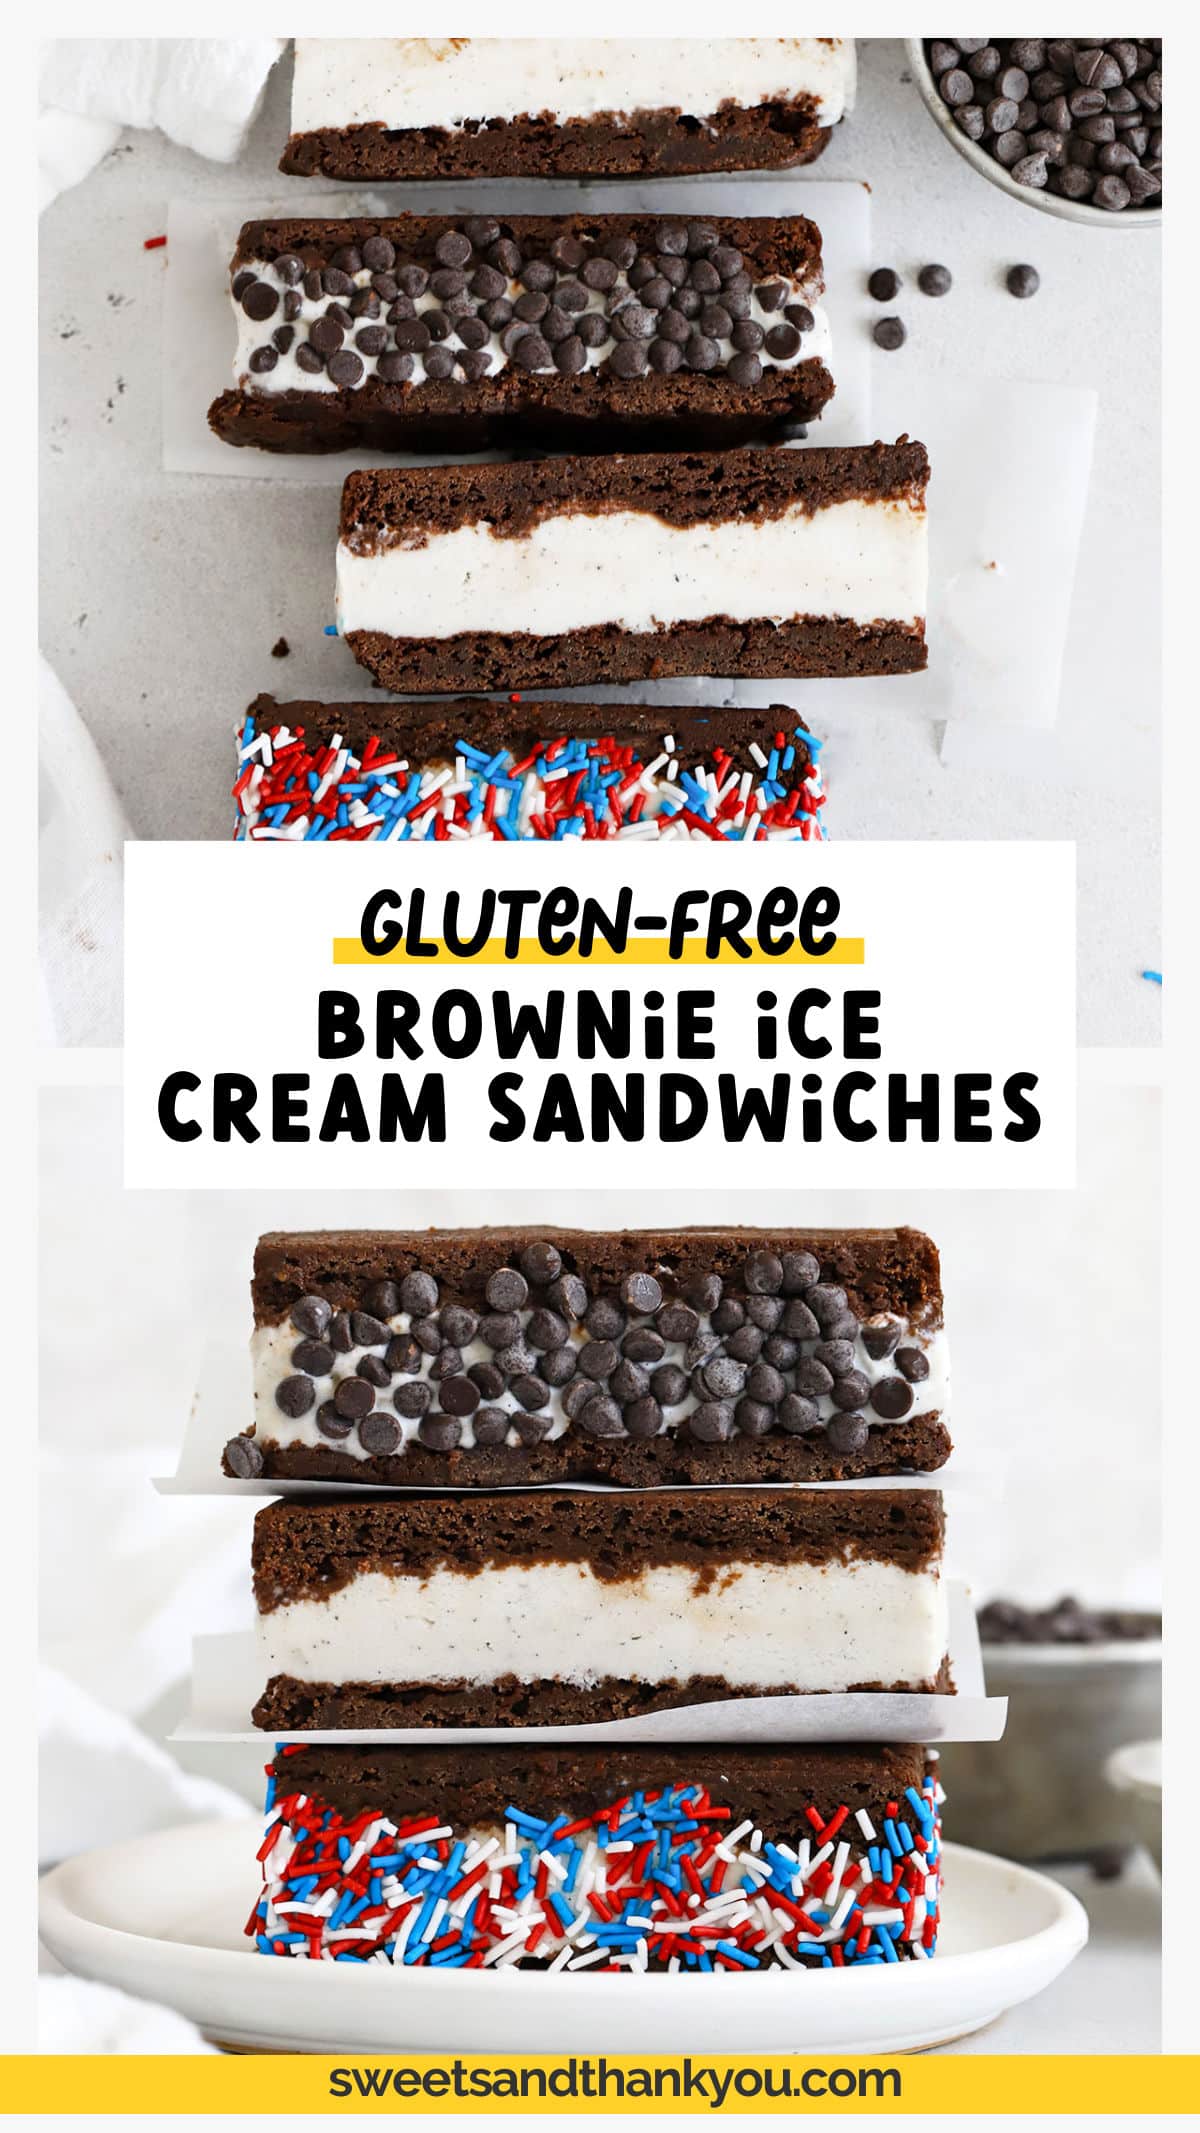 Learn how to make Gluten-Free Brownie Ice Cream Sandwiches! This easy ice cream dessert is the perfect summer treat! These homemade gluten-free ice cream sandwiches start with two thin layers of fudgy brownie paired with creamy vanilla ice cream. They have all the classic flavor you love, simply made gluten-free. Get our gluten-free ice cream sandwich recipe, cute ways to decorate, yummy flavor combinations to try and more at sweetsandthankyou.com